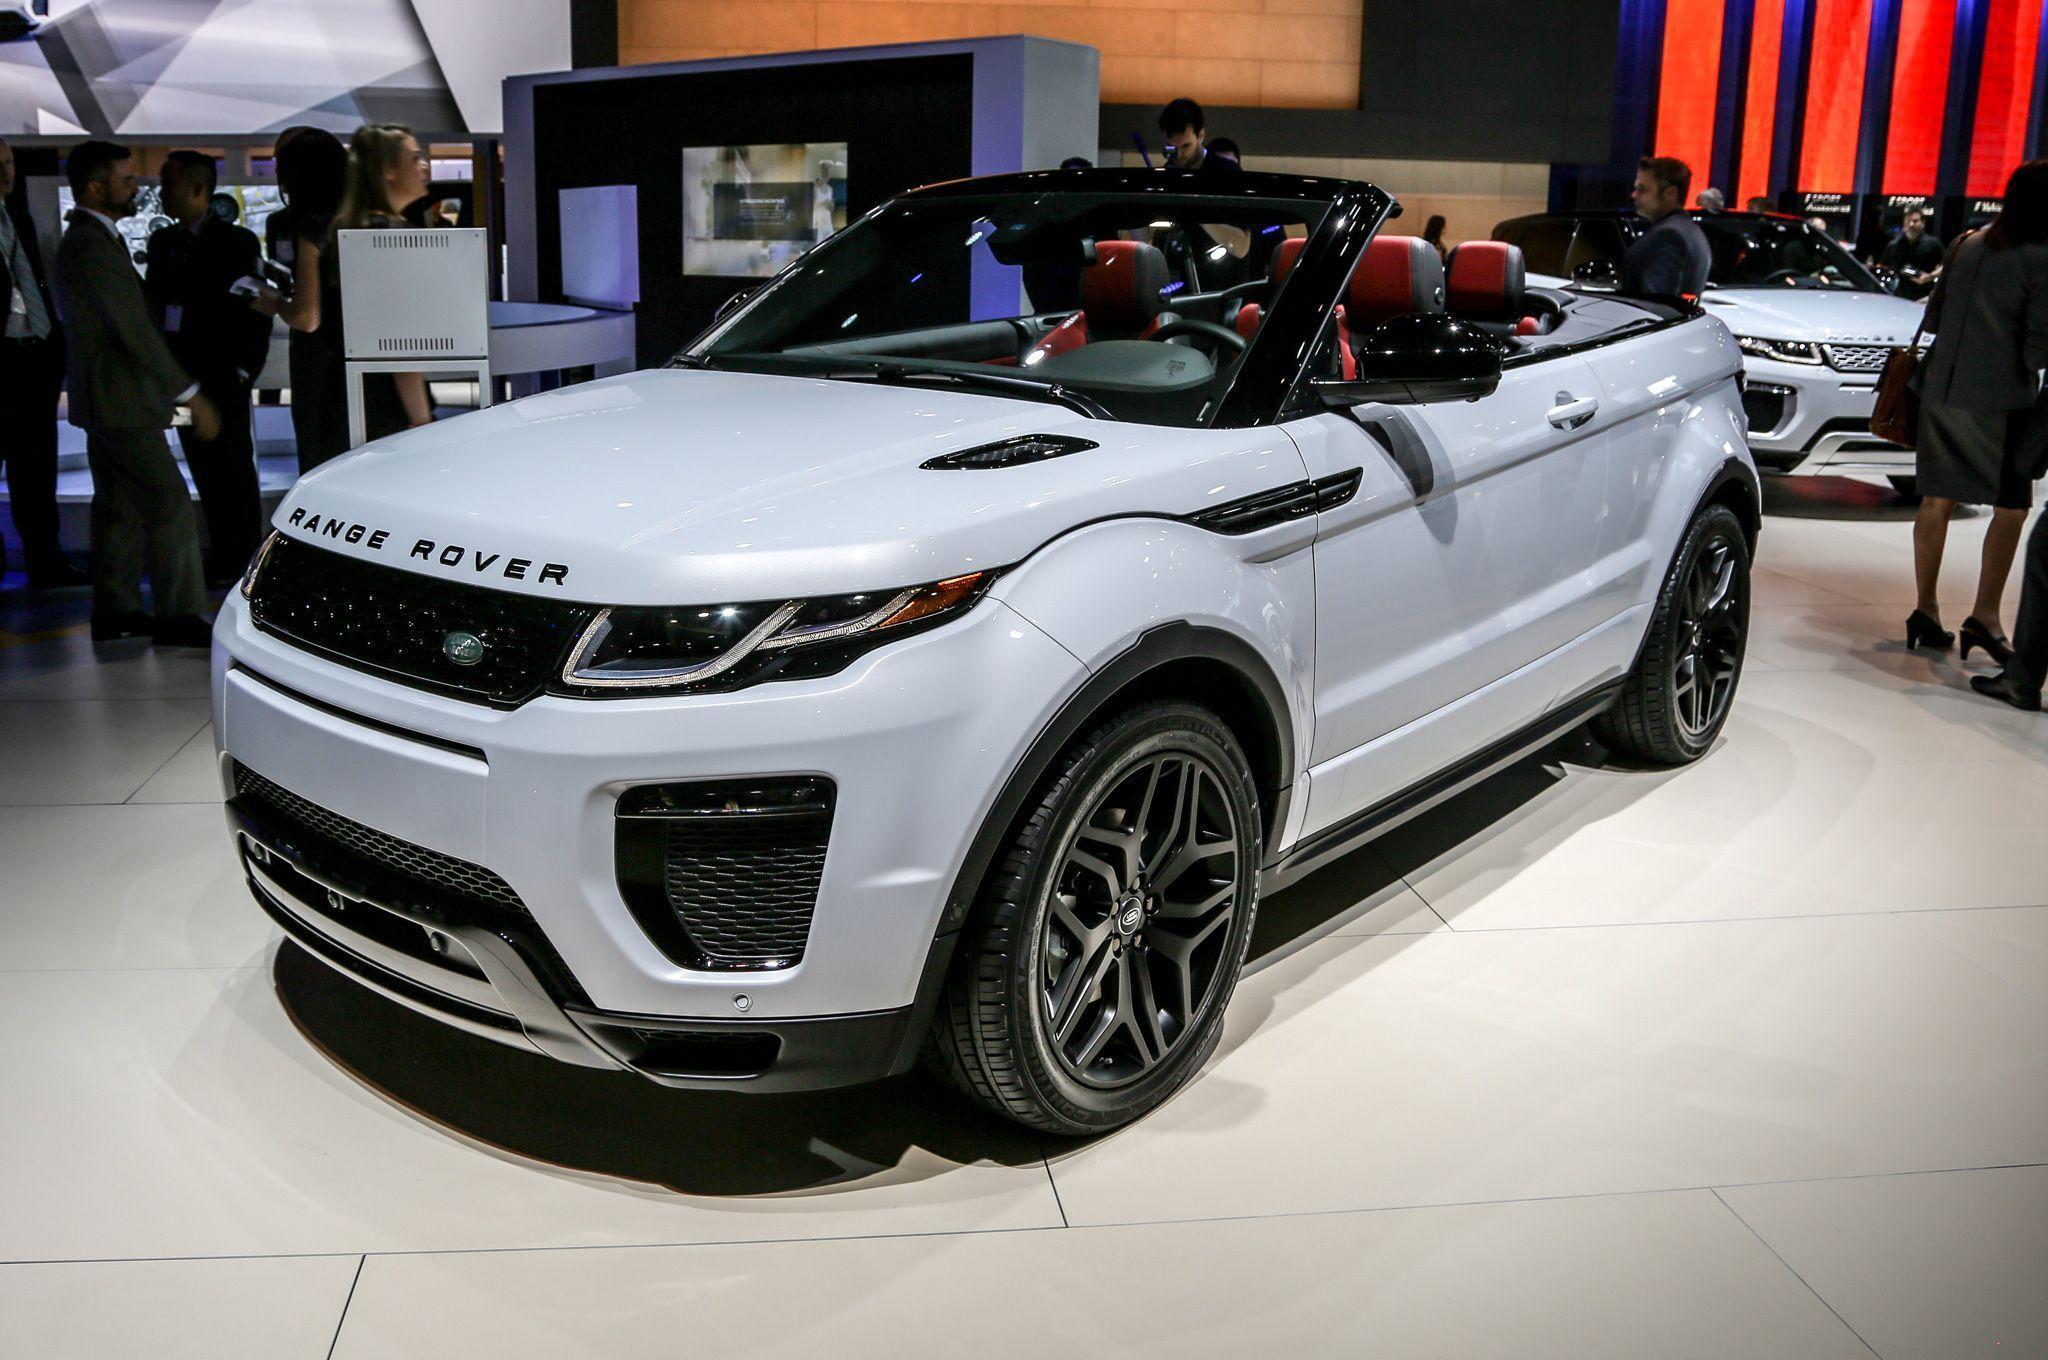 Download 2017 Range Rover Evoque Convertible Picture (9716) at